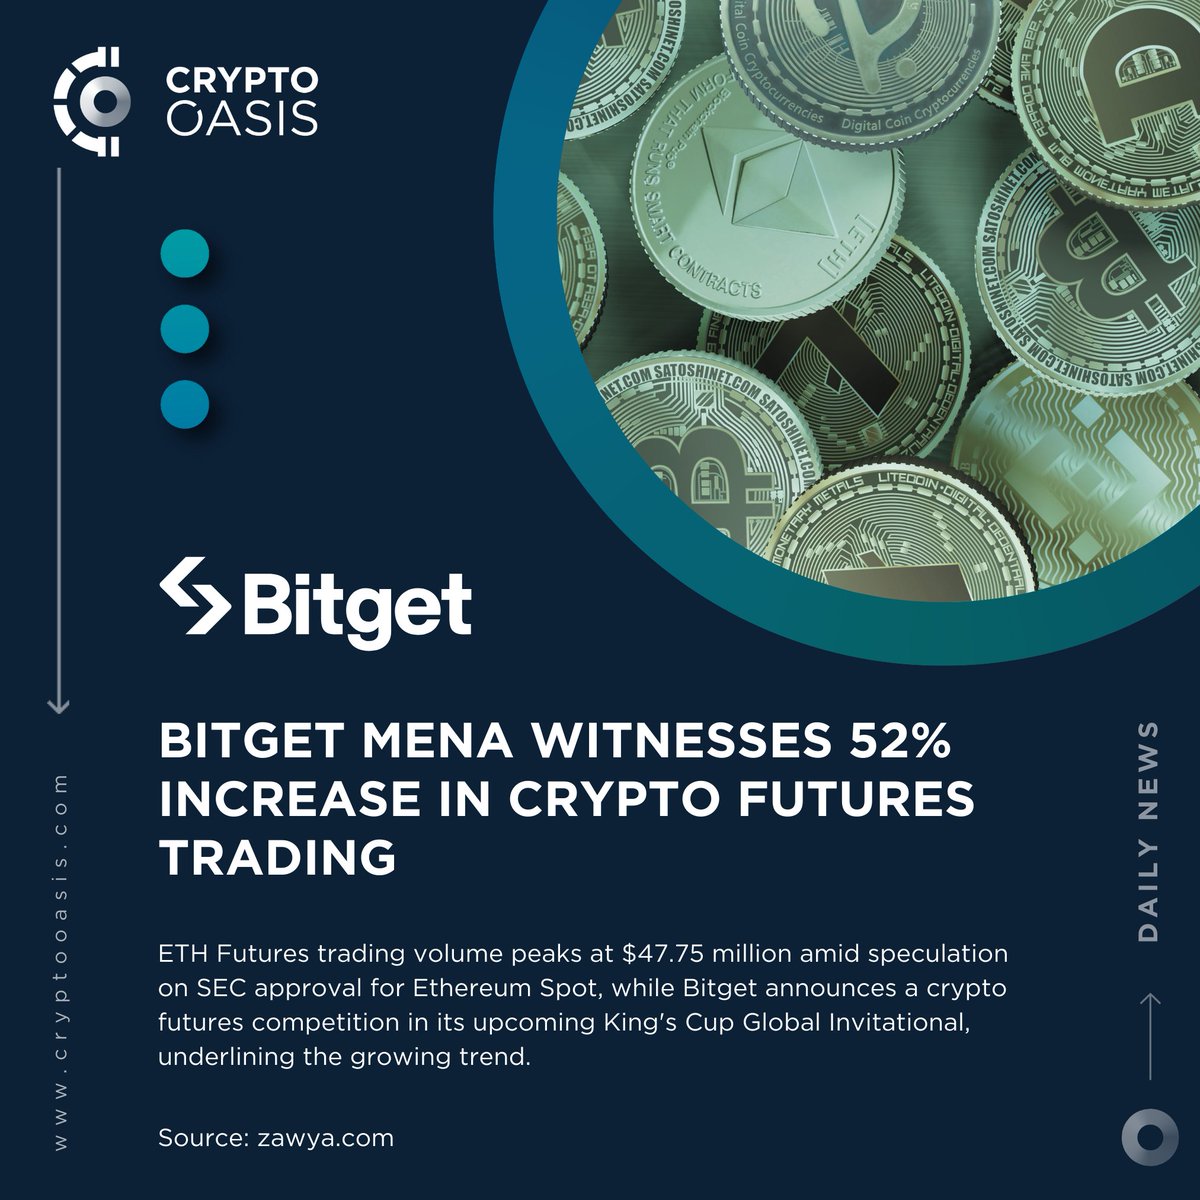 📢 Crypto Oasis Daily News $ETH Futures trading volume peaks at $47.75M amid speculation on SEC approval for @Ethereum Spot, while @bitgetglobal announces a crypto futures competition in its upcoming #KCGl, underlining the growing trend. t.ly/7gbVR @Zawya